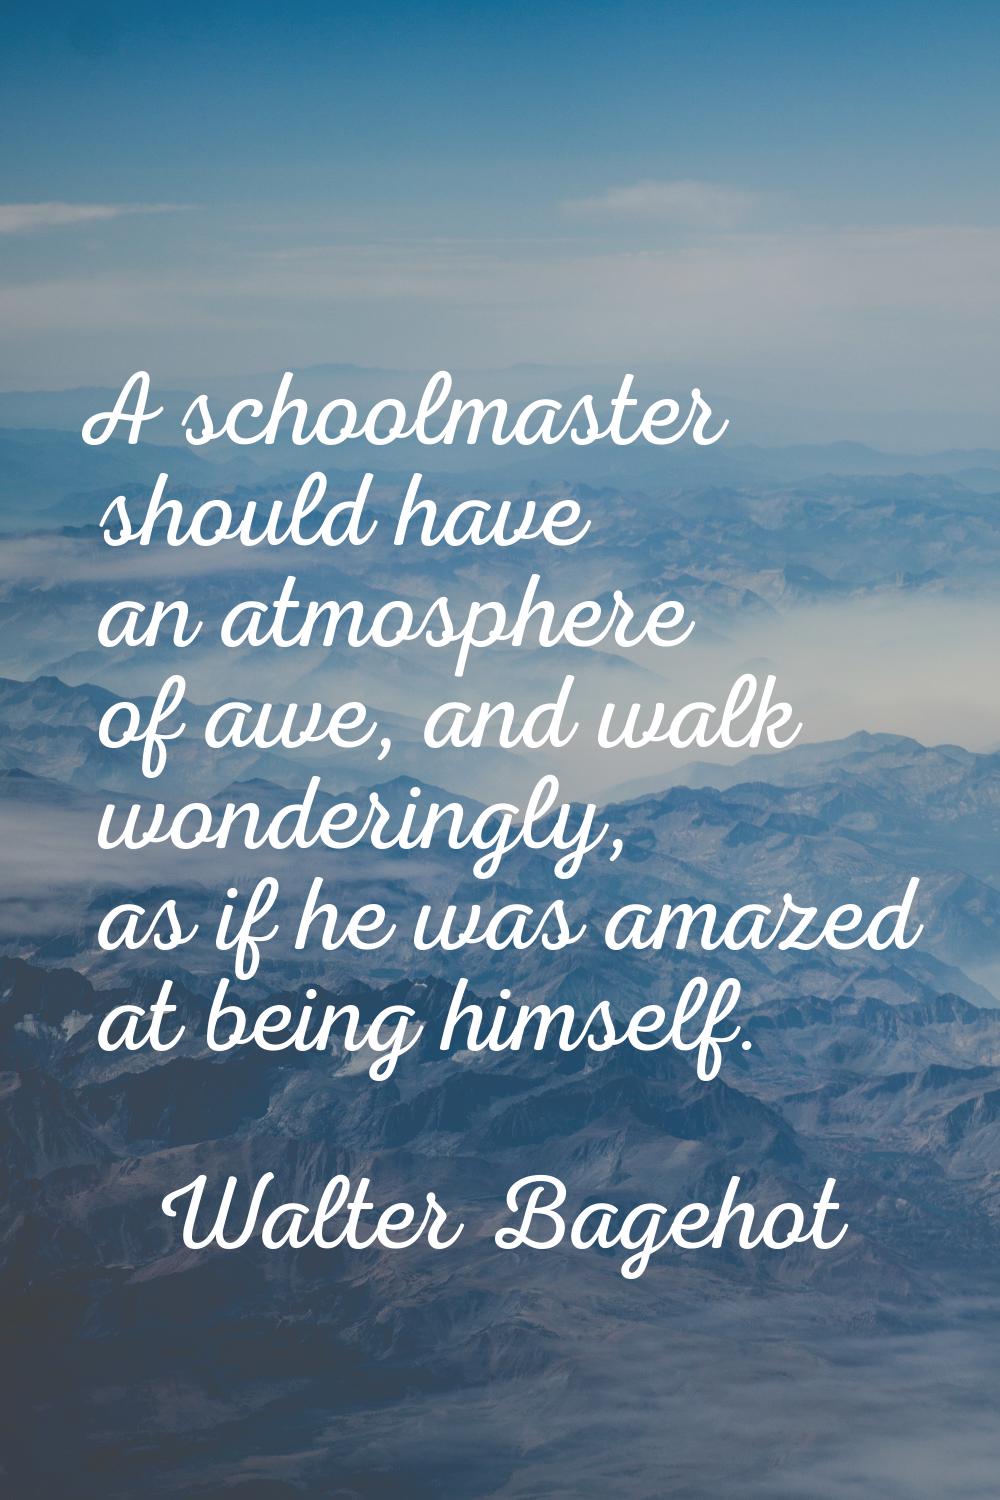 A schoolmaster should have an atmosphere of awe, and walk wonderingly, as if he was amazed at being